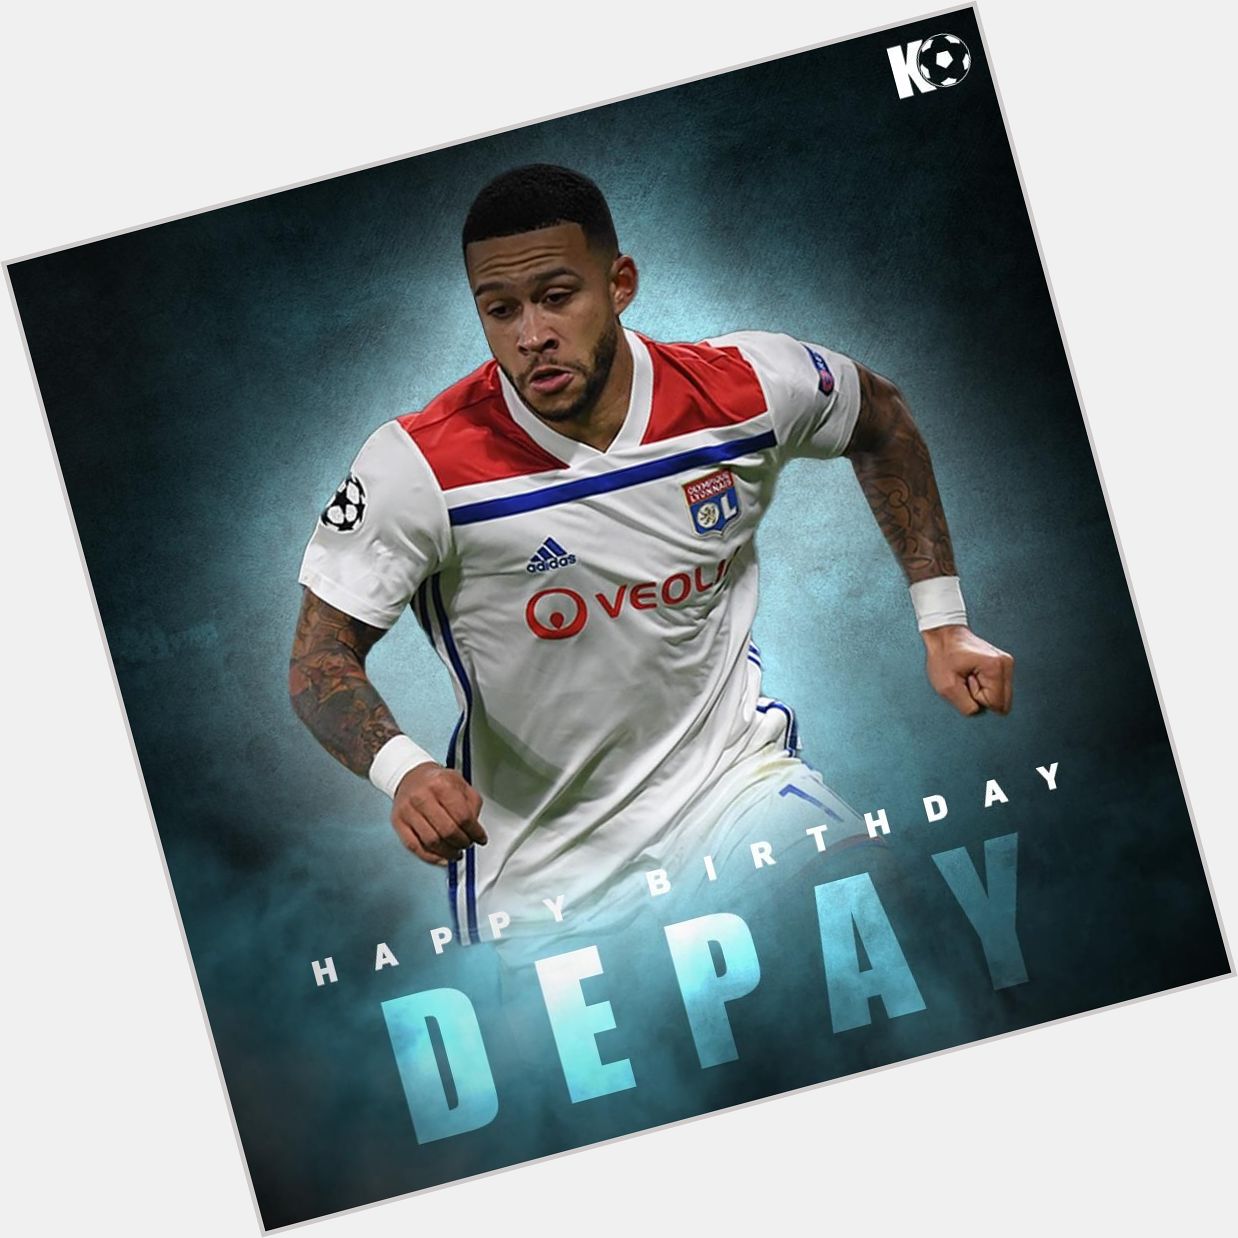 A special day for the footballing freestyler! Join in wishing Memphis Depay a Happy Birthday 